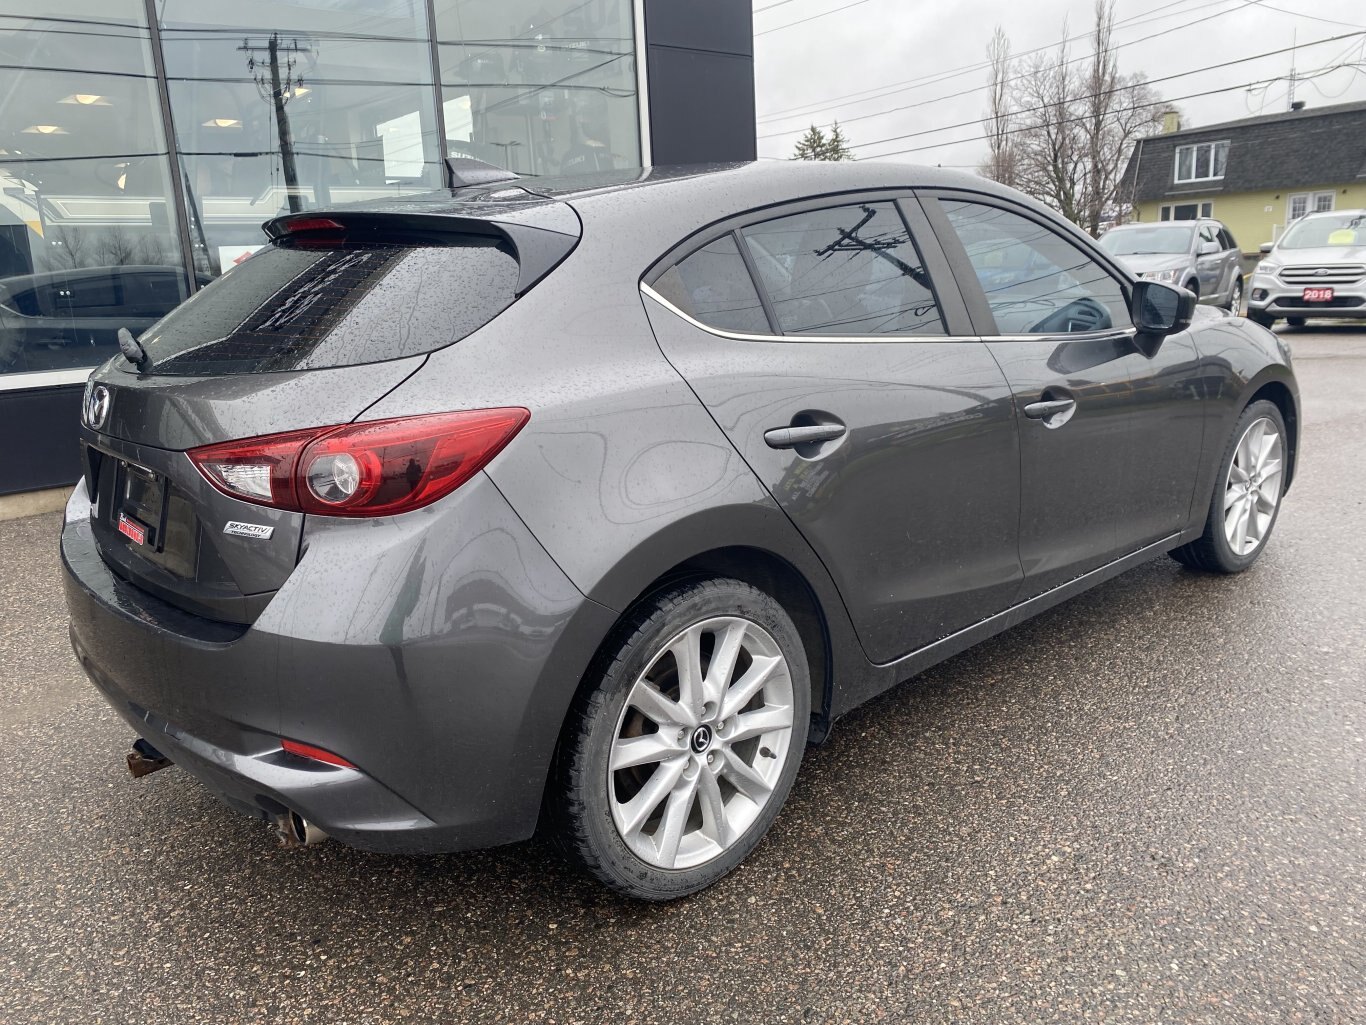 2017 MAZDA 3 GT FRONT WHEEL DRIVE WITH SUNROOF, LEATHER SEATS, HEATED SEATS, REAR VIEW CAMERA, HEATED STEERING WHEEL AND NAVIGATION!!